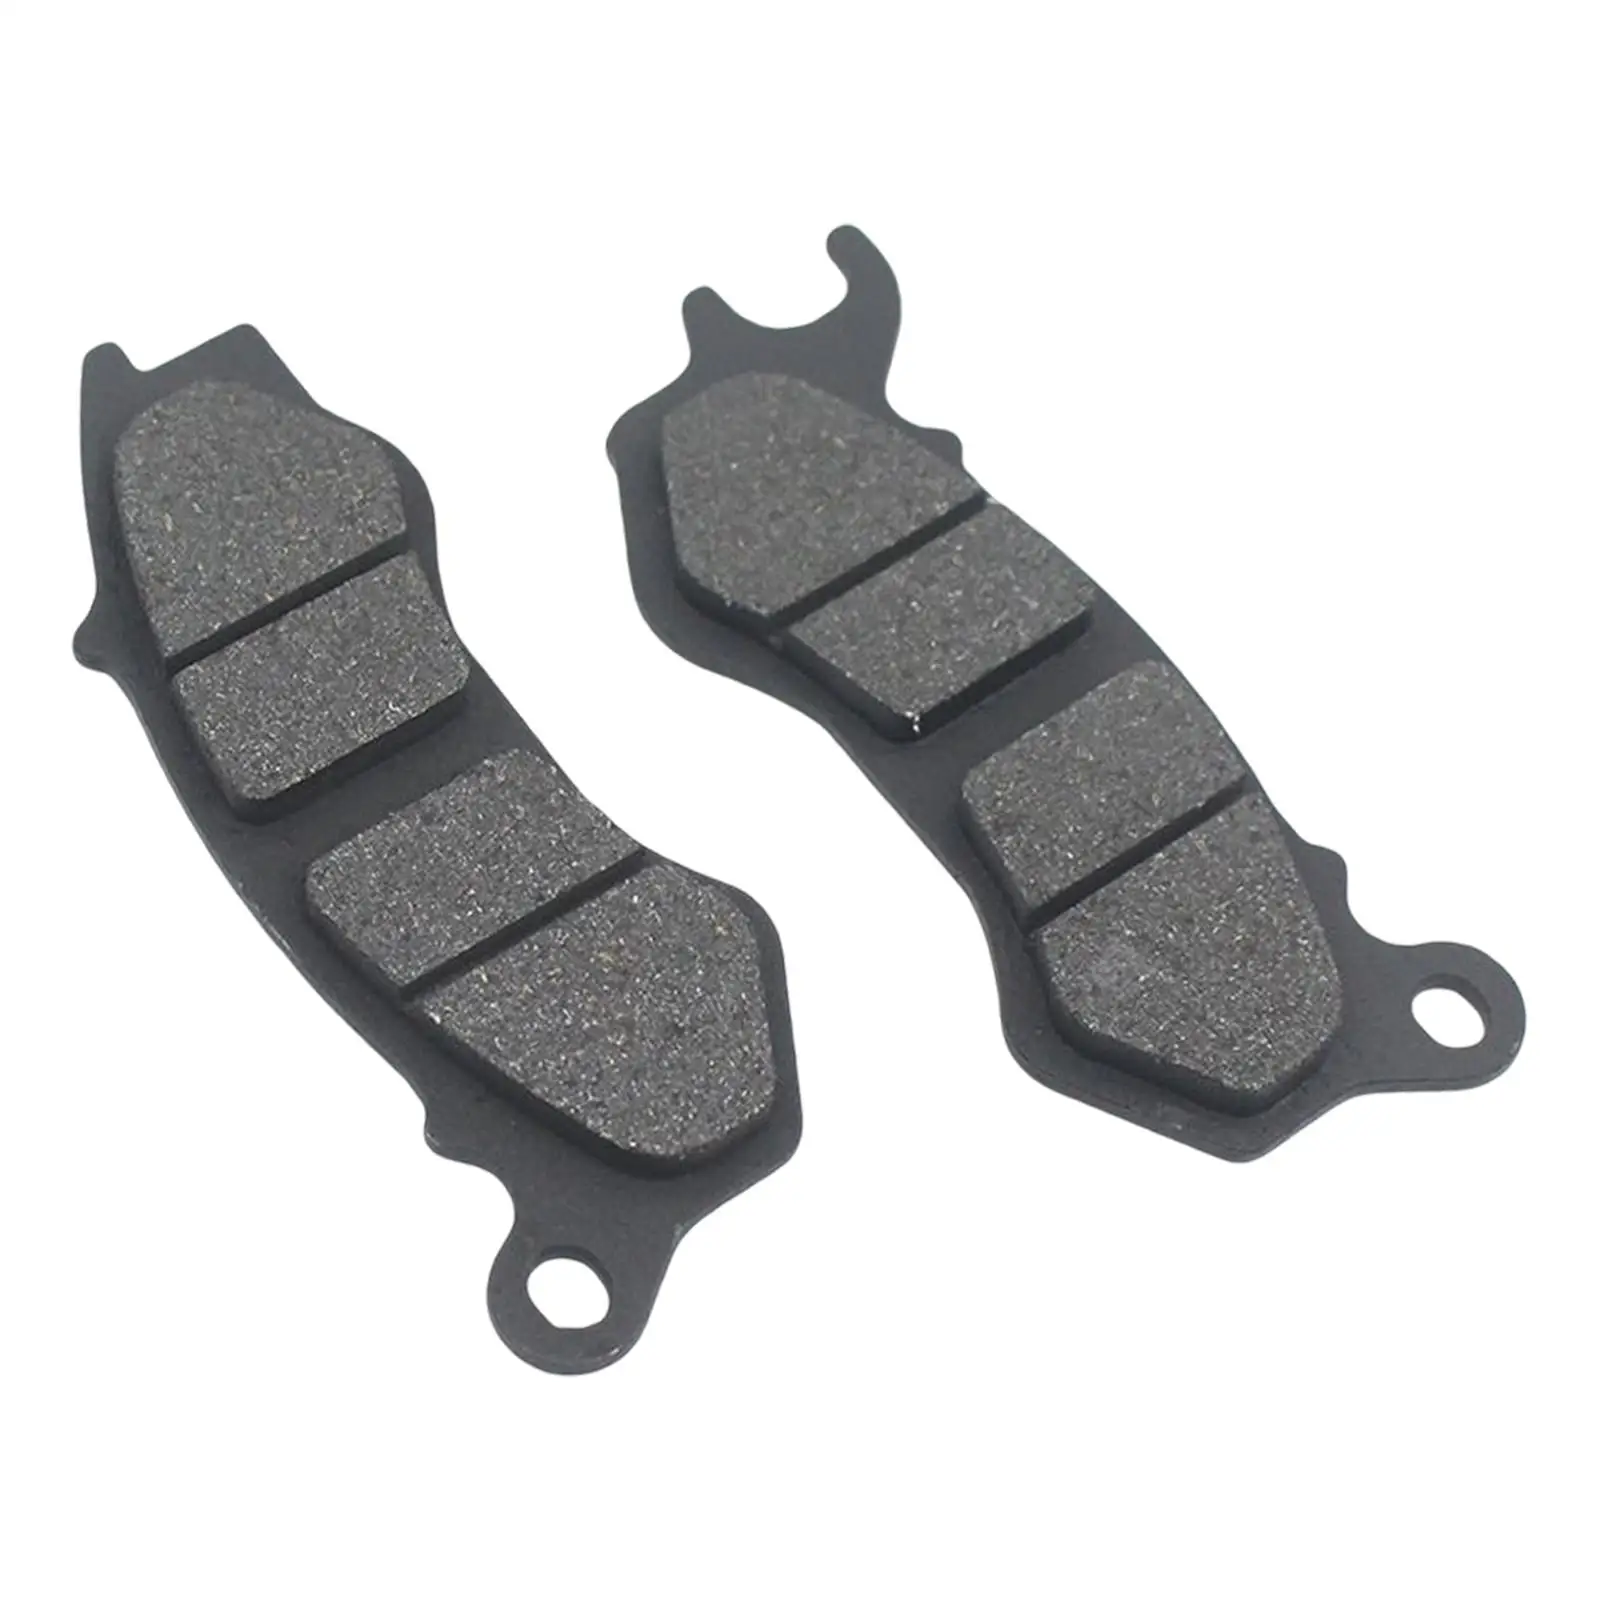 Front Brake Pads for Honda PCX 125 150 - High-Quality Wood Material, Eas... - £16.20 GBP